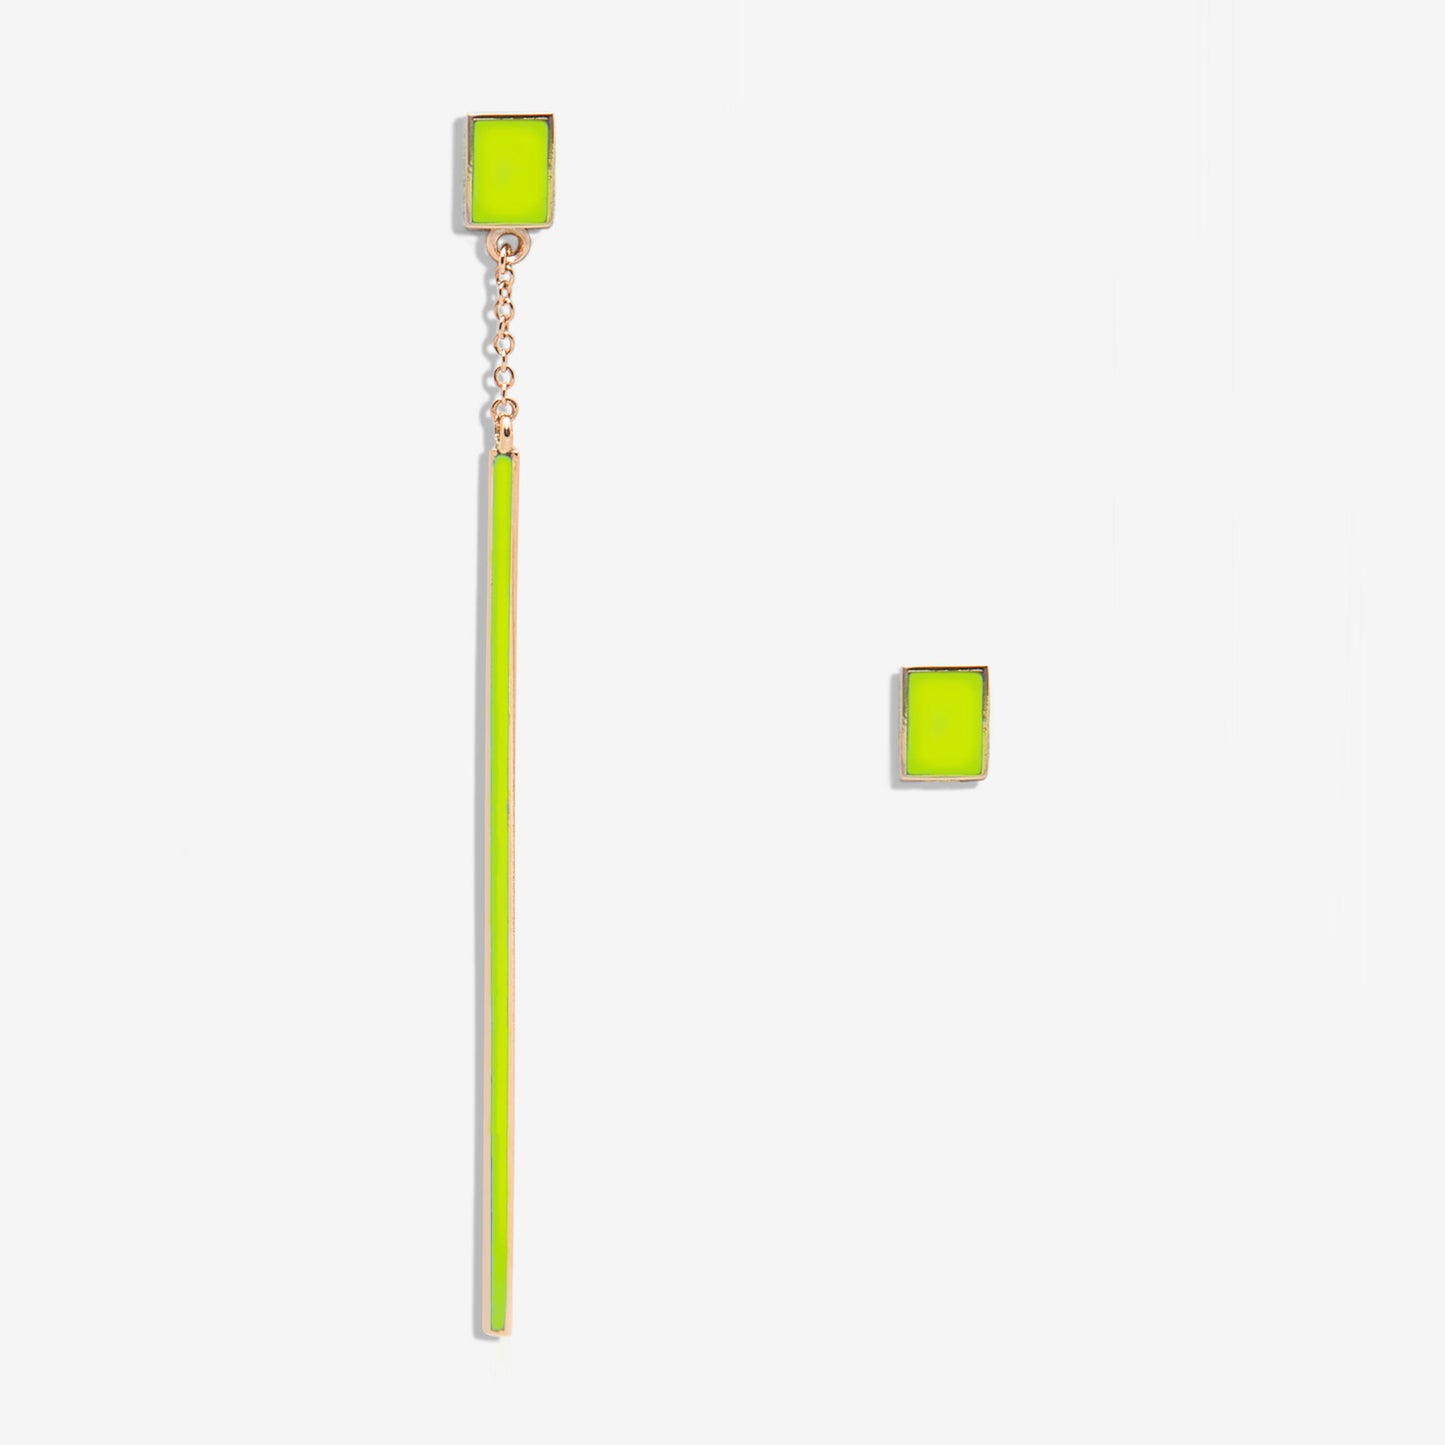 Floating fluo yellow drop earring and rectangle